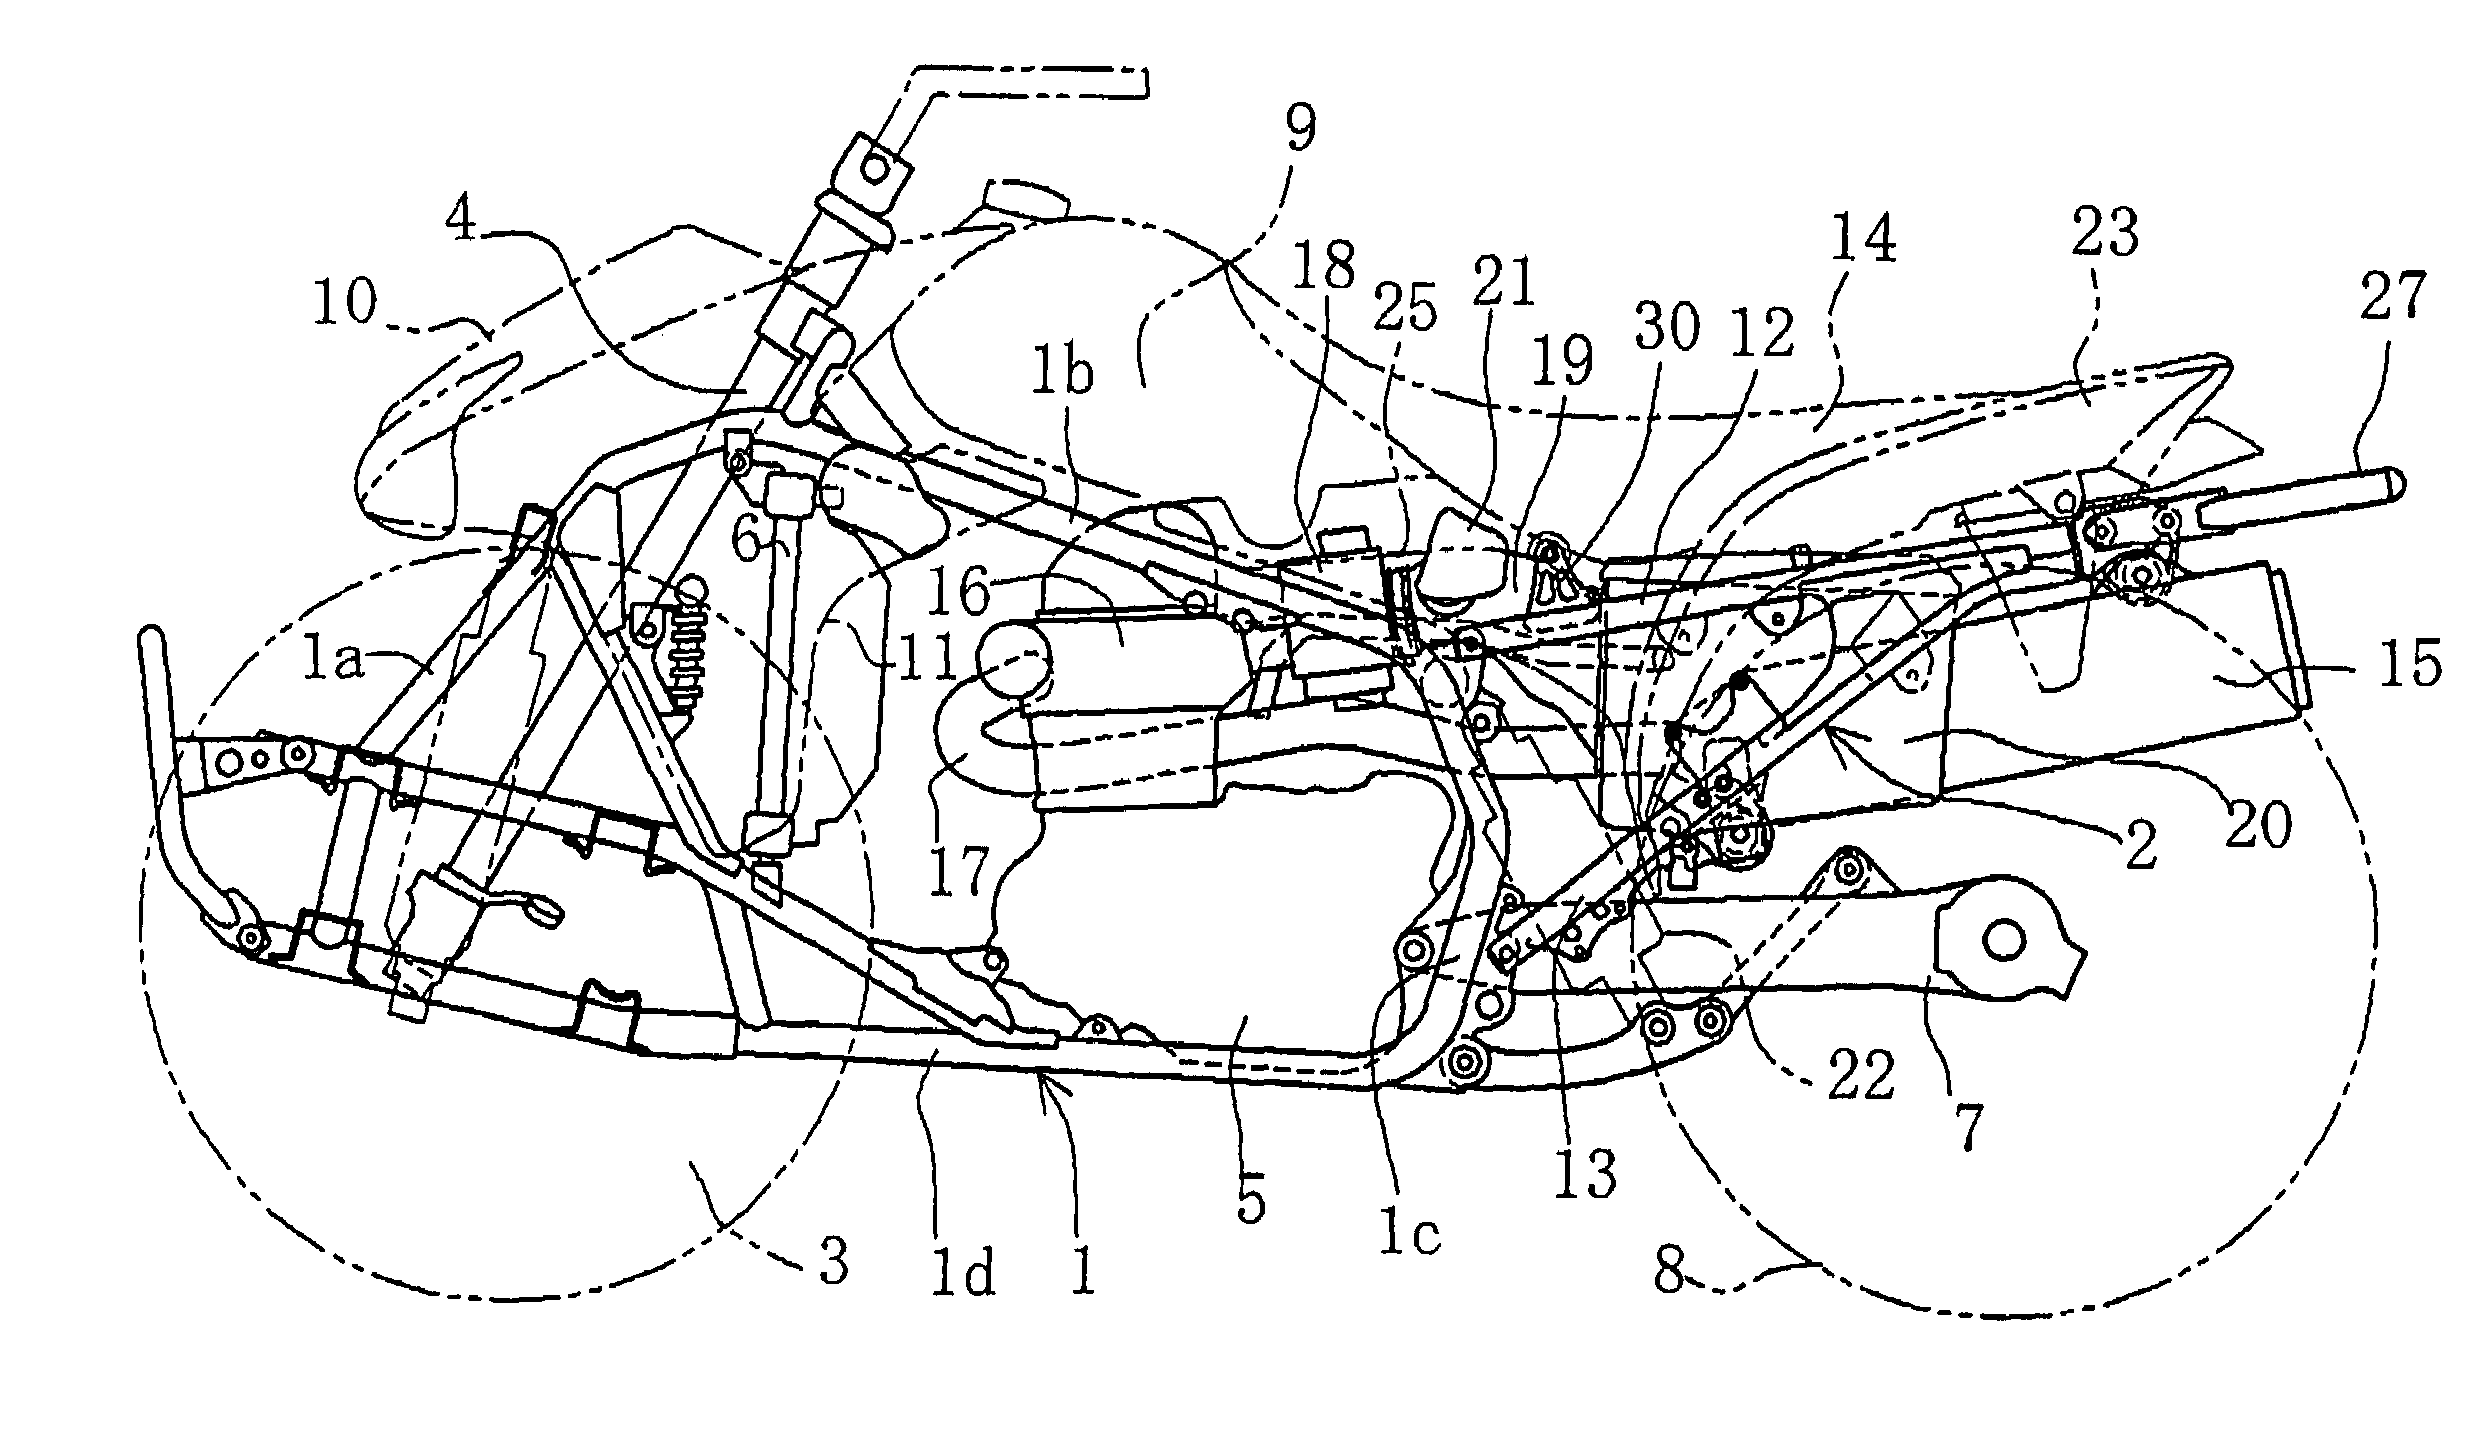 Intake system structure for vehicle